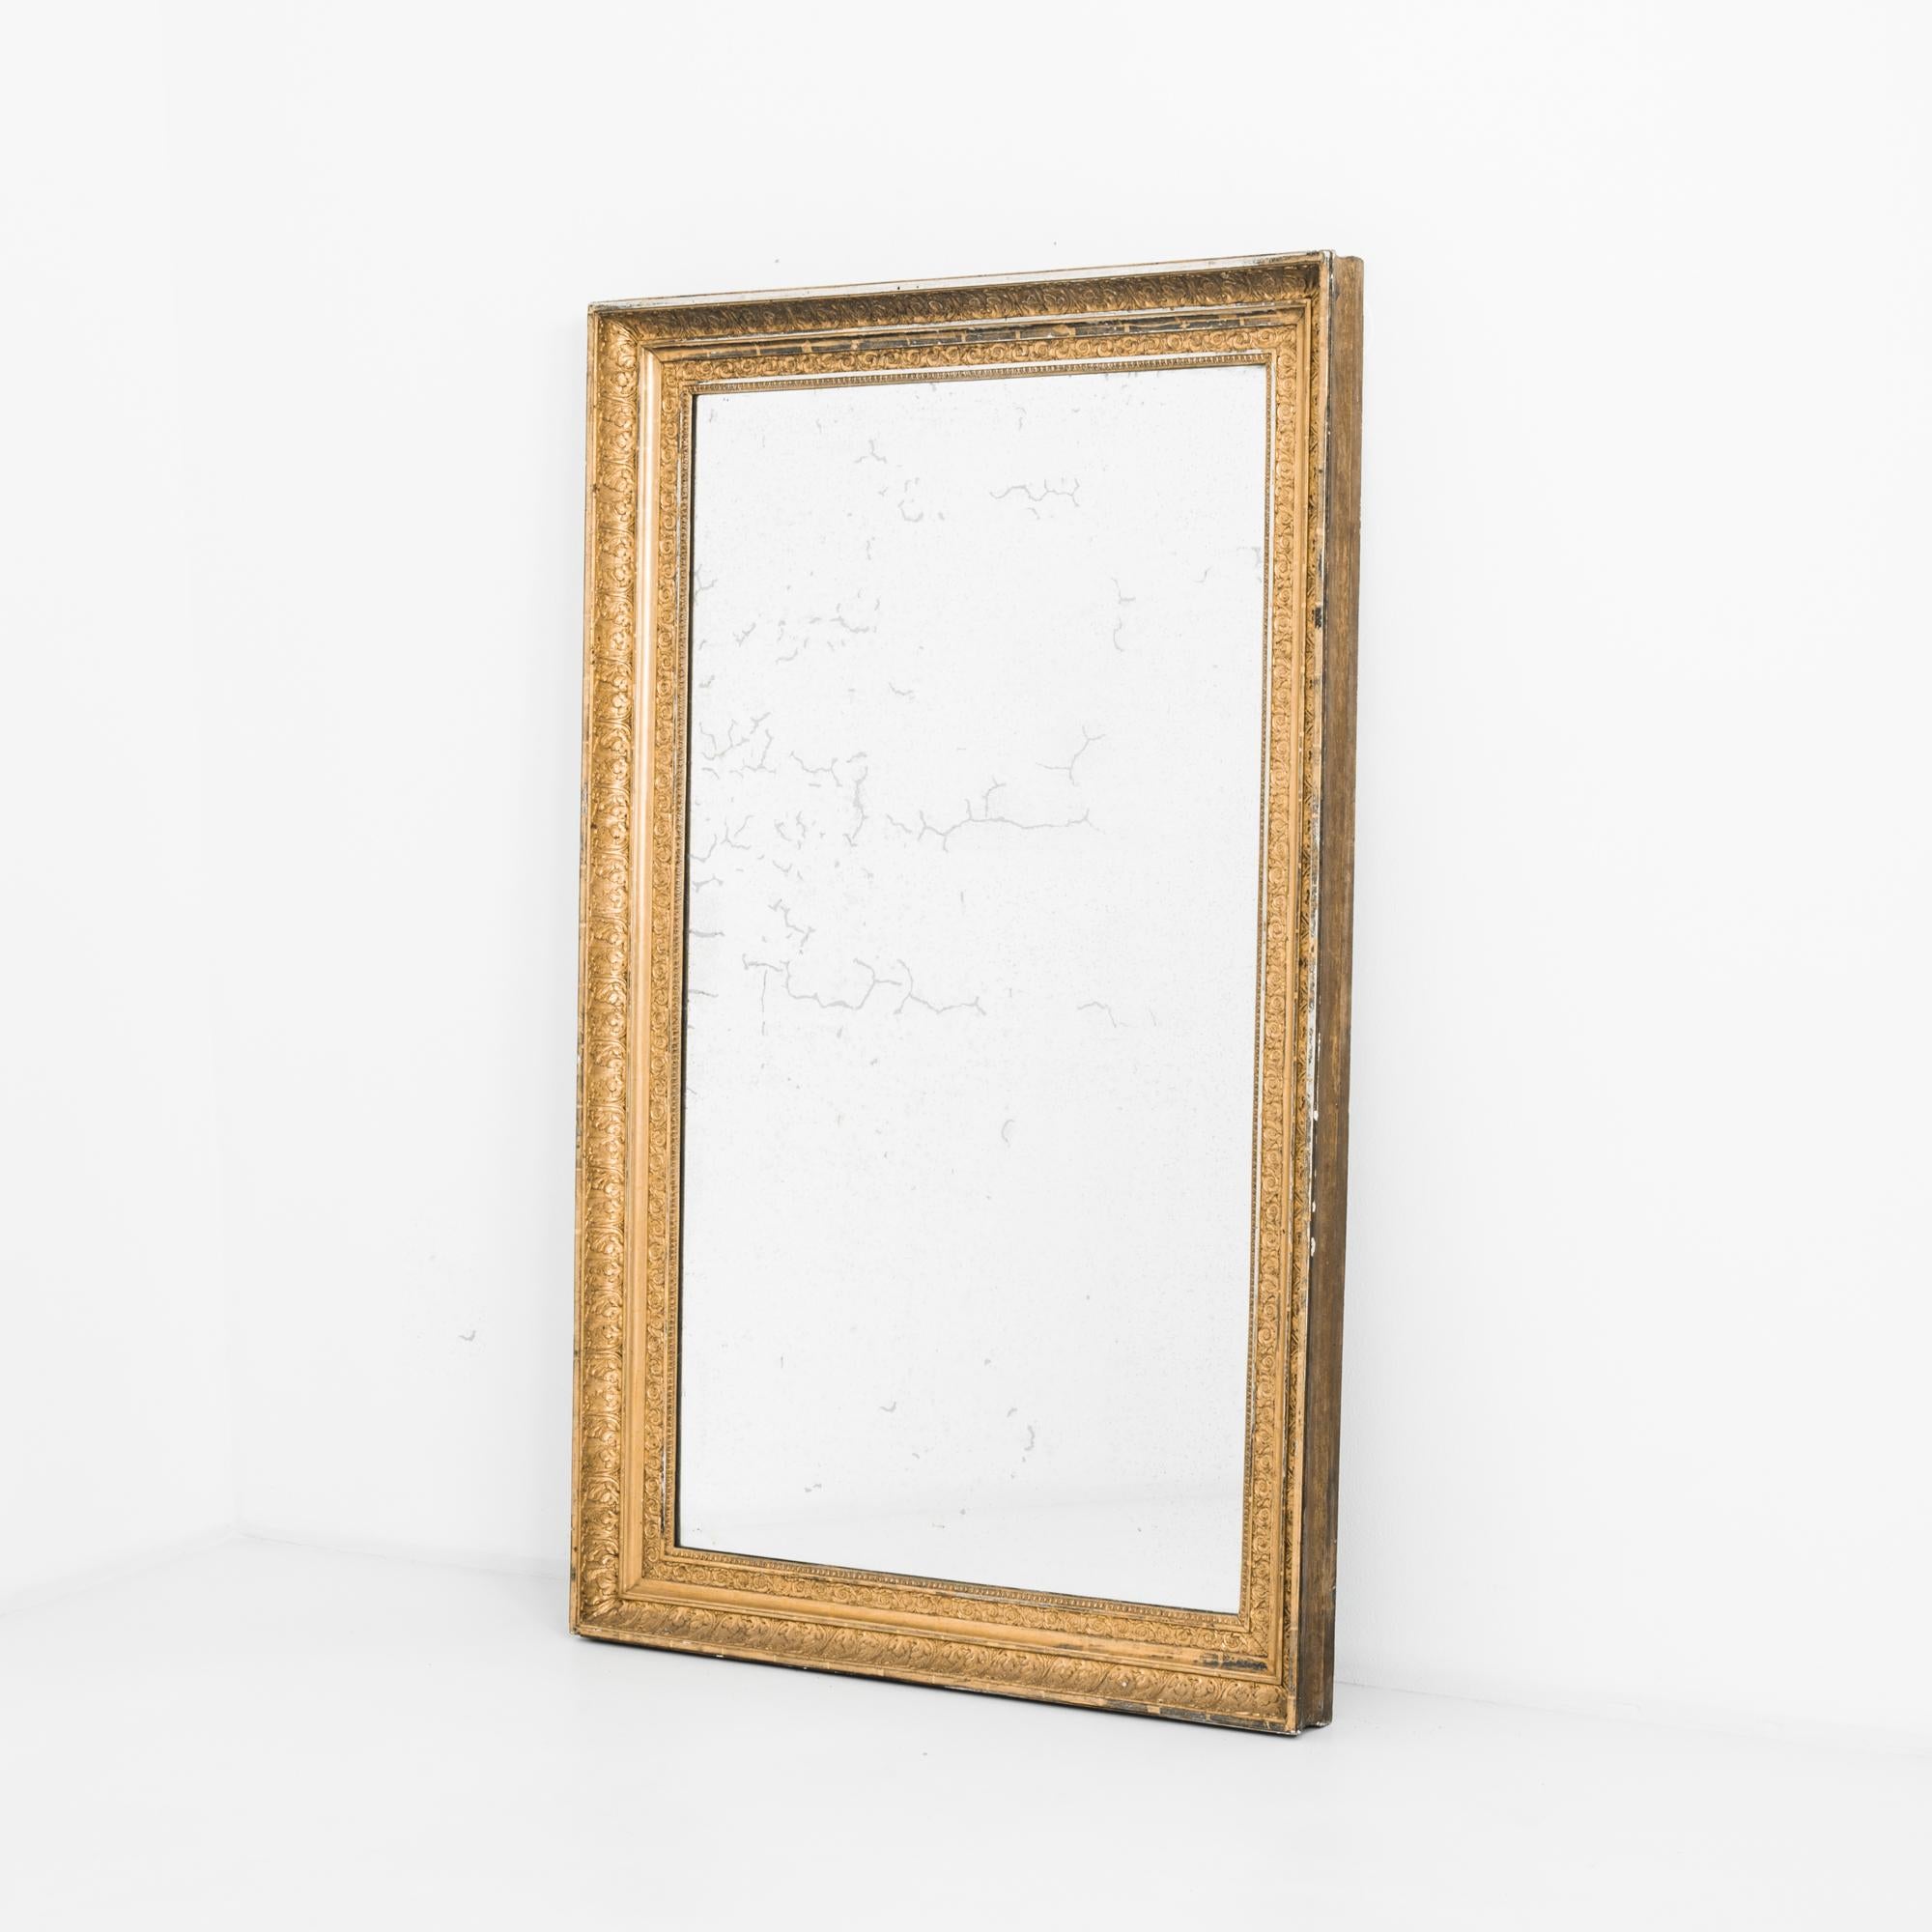 A wooden mirror produced in France circa 1880. This gilt, antique mirror, measuring five and a half feet tall, features an ornate leaf motif around its deep frame. As a looking glass produced in the height of the Aesthetic Movement, it is meant to